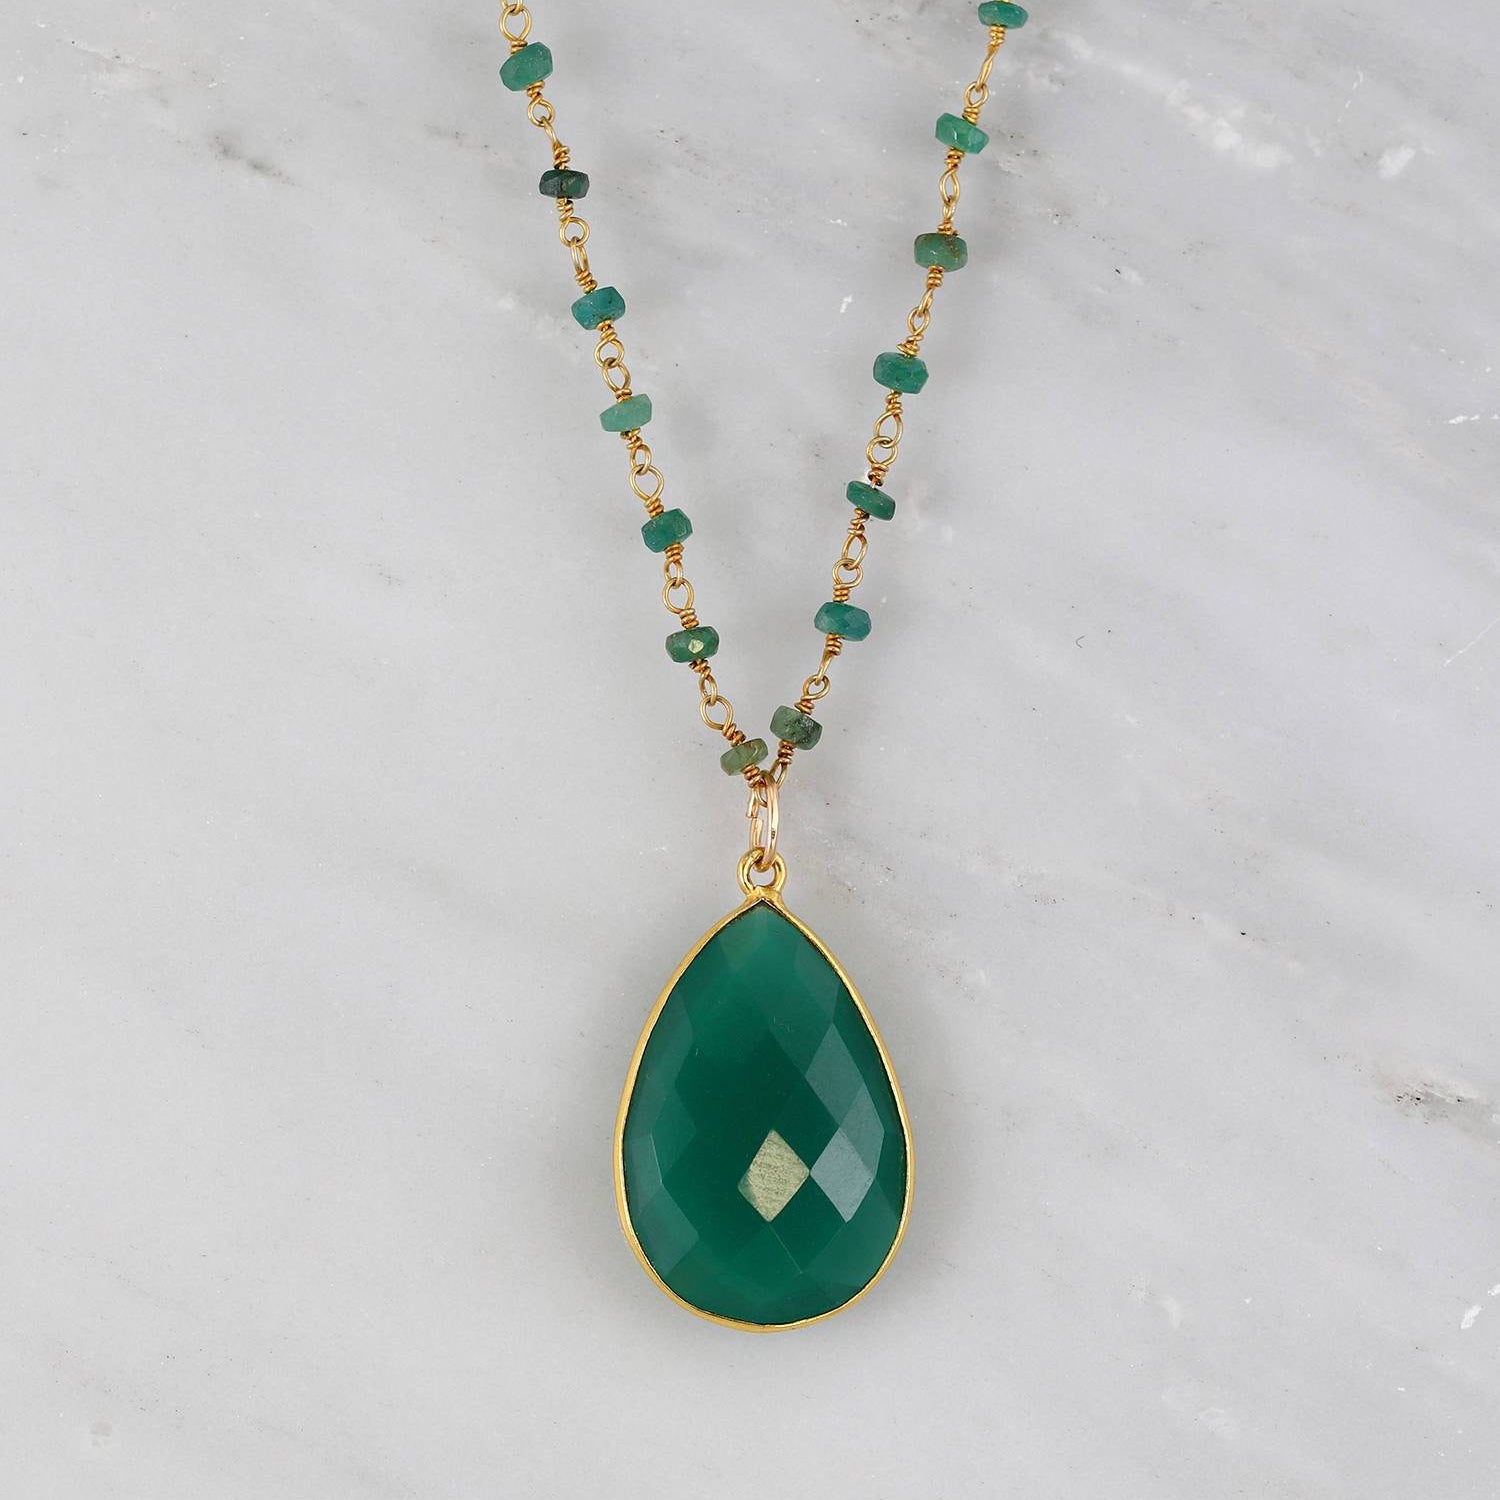 Green Onyx Necklace, Green Wire Wrapped, Valentine's Gift for her, Gold Gemstone Pendent, Wire Wrapped Emerald Necklace, Tear Drop Necklace